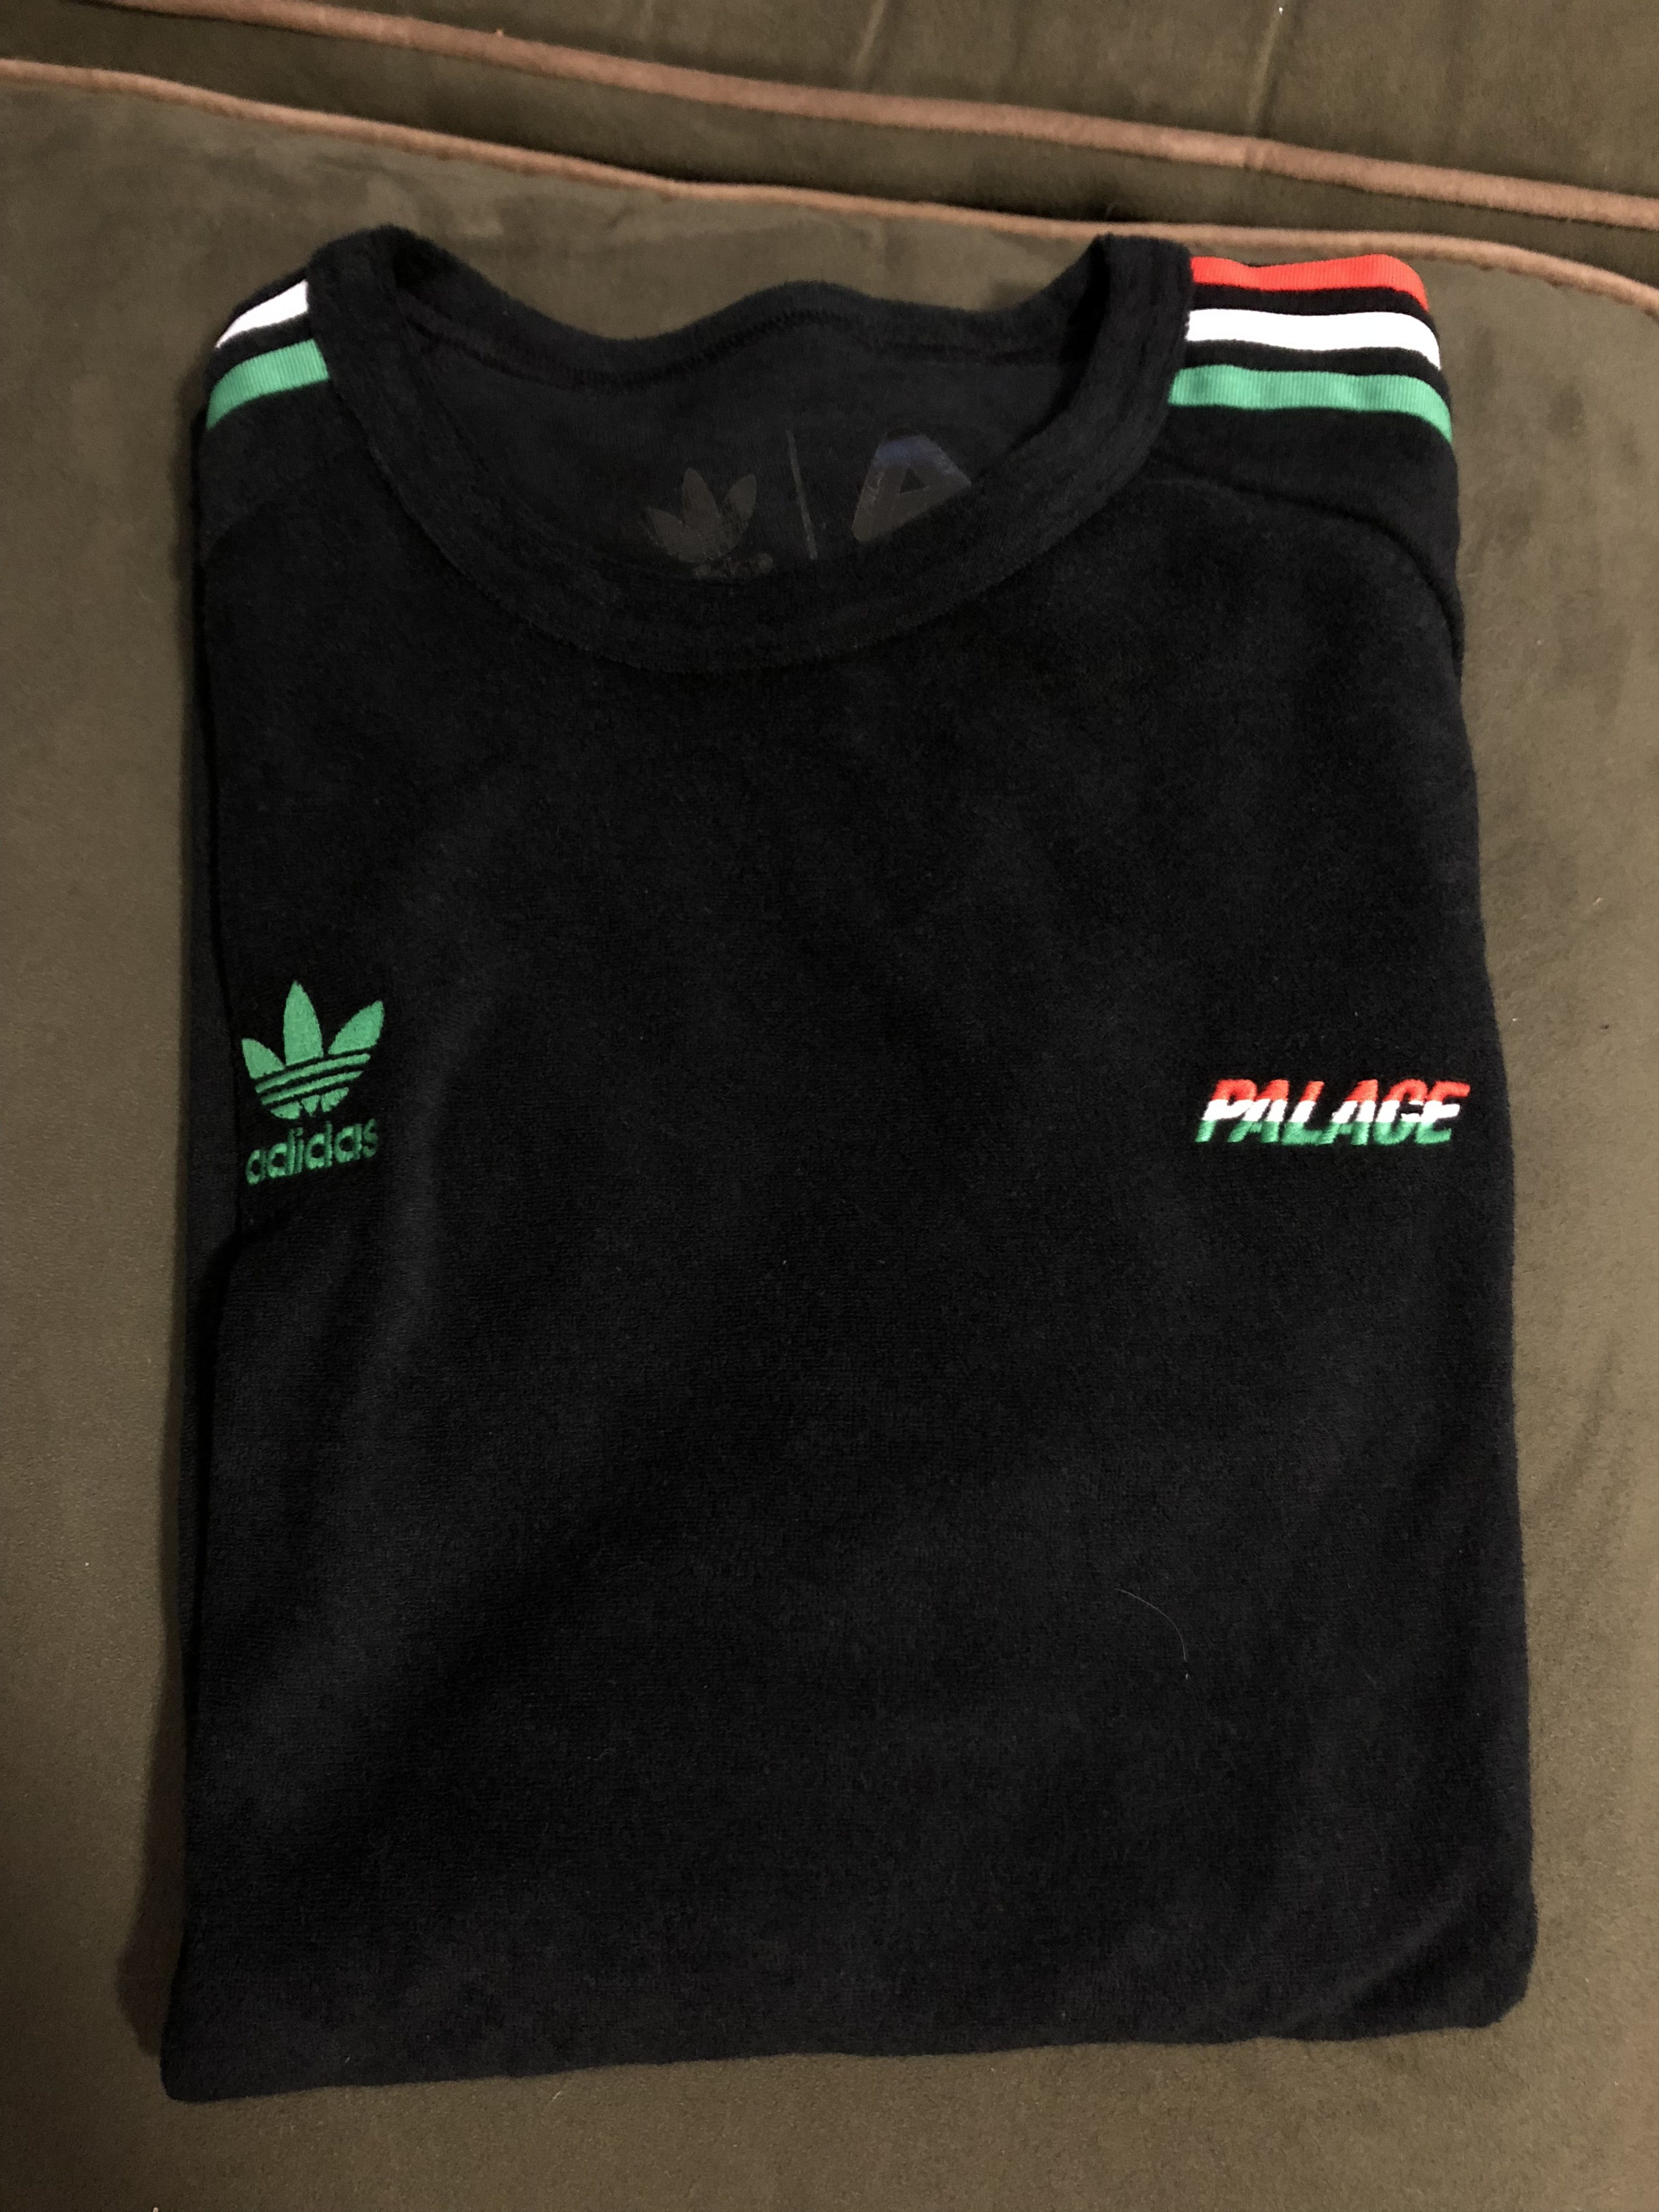 Adidas Palace x Adidas Terry T Shirt - Italy Black/Green/Red Grailed